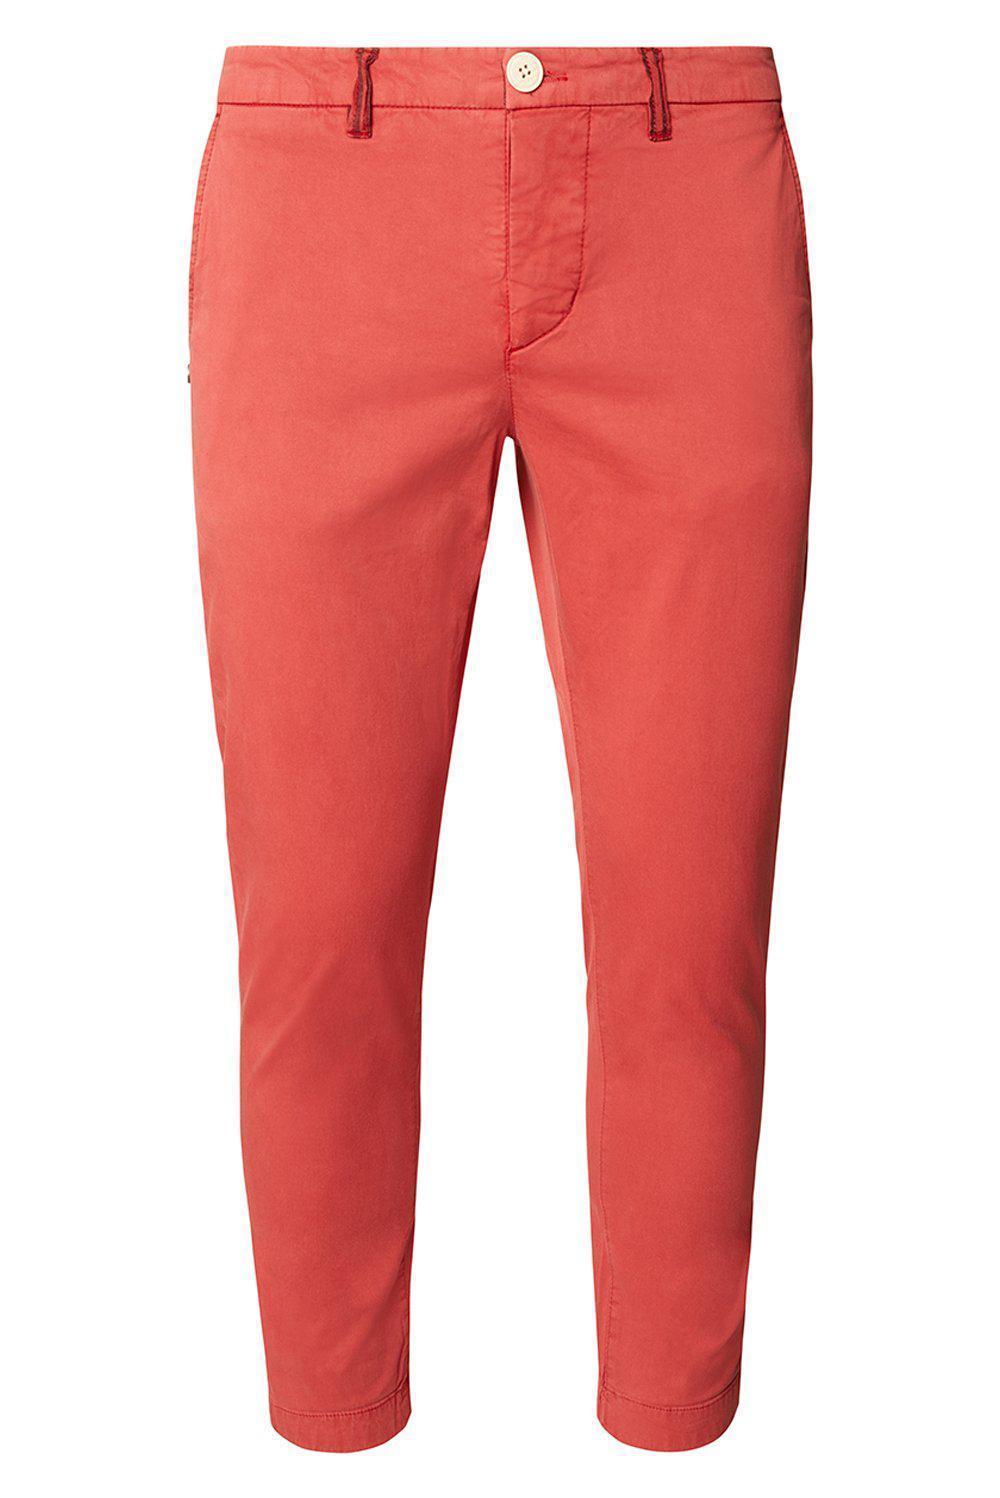 European Roll Up Ankle Casual Pants - Ron Tomson